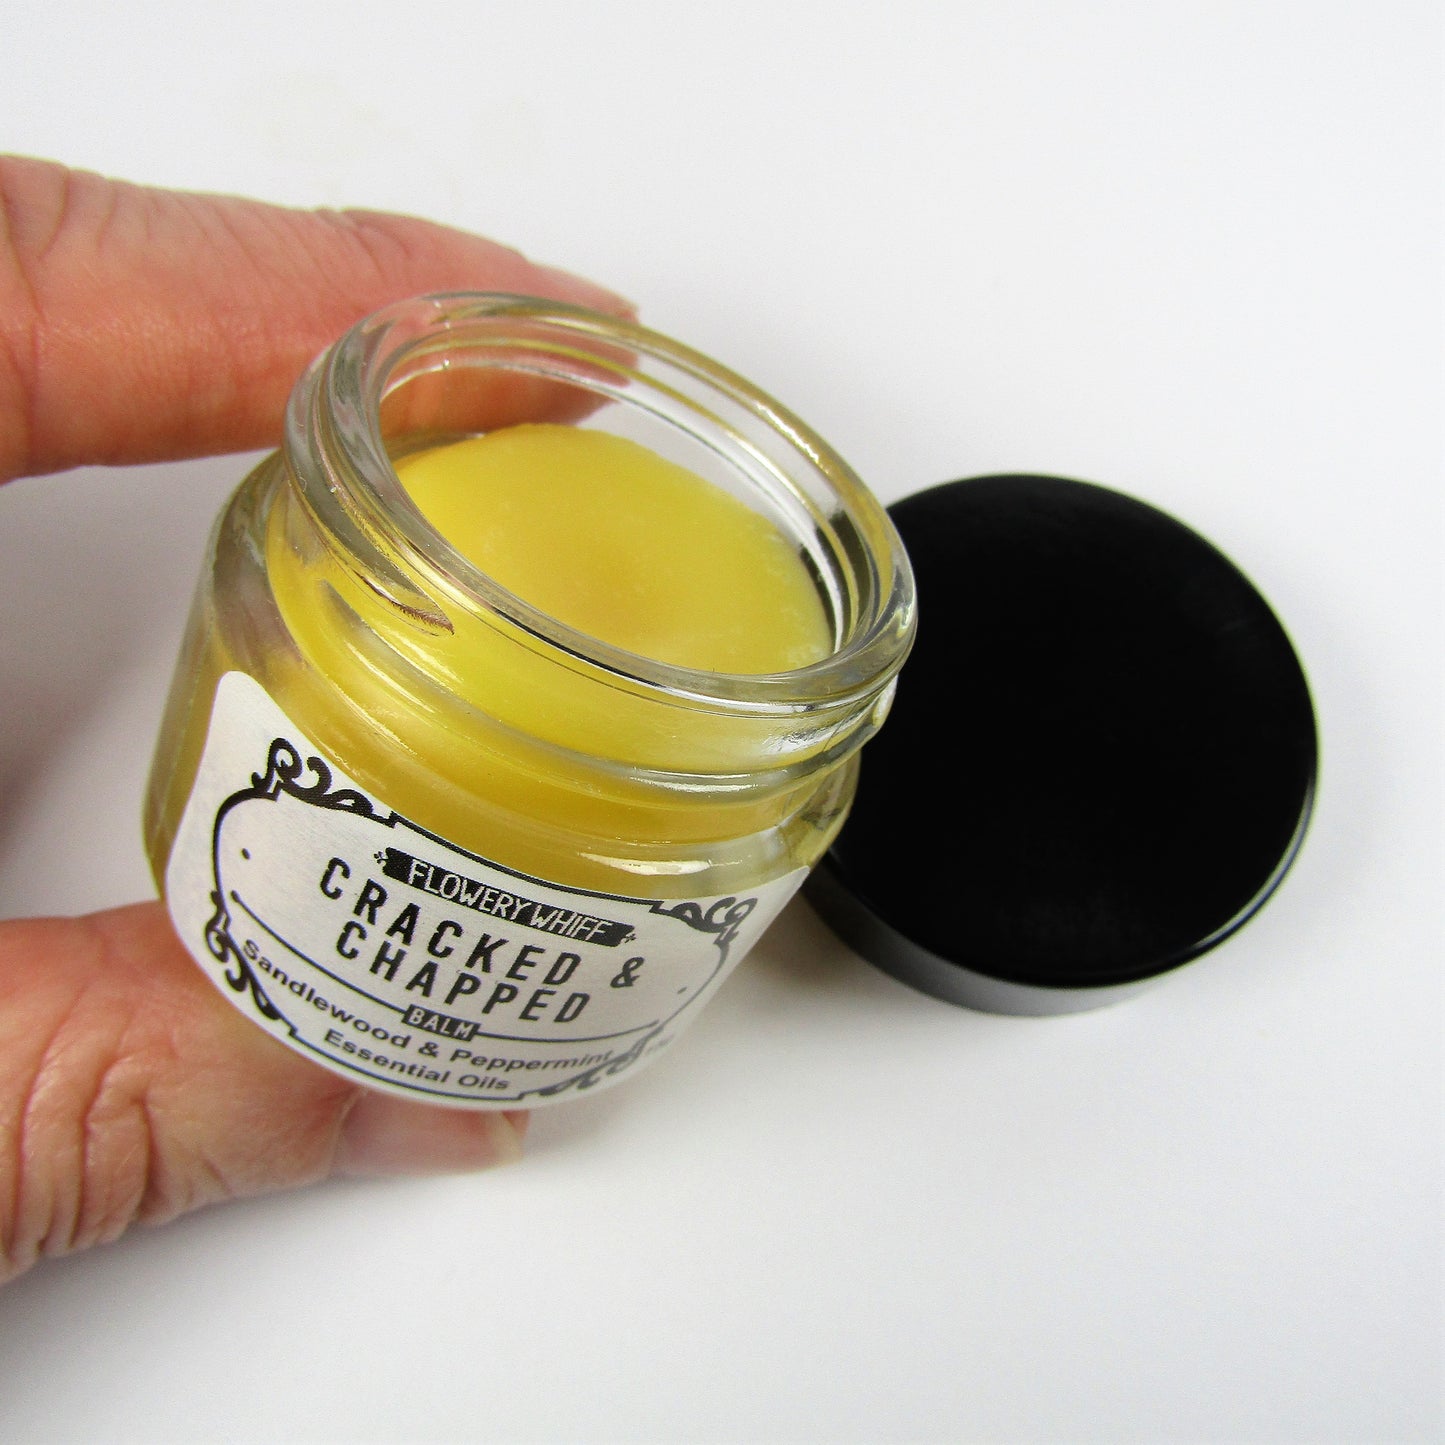 Cracked and Chapped Soothing Balm